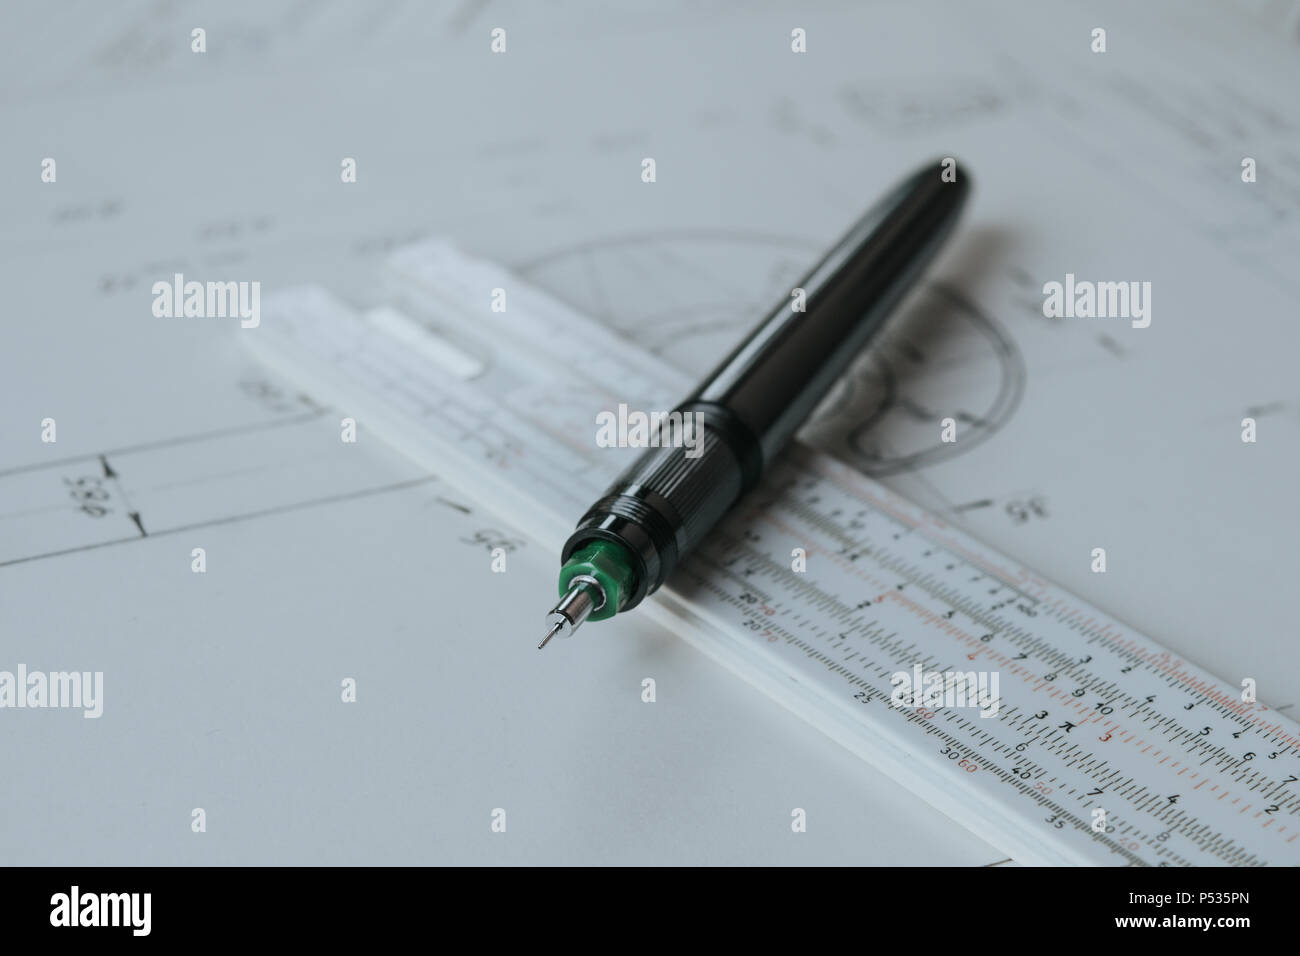 Technical pen (rapidograph) on slide rule and technical drawing Stock Photo